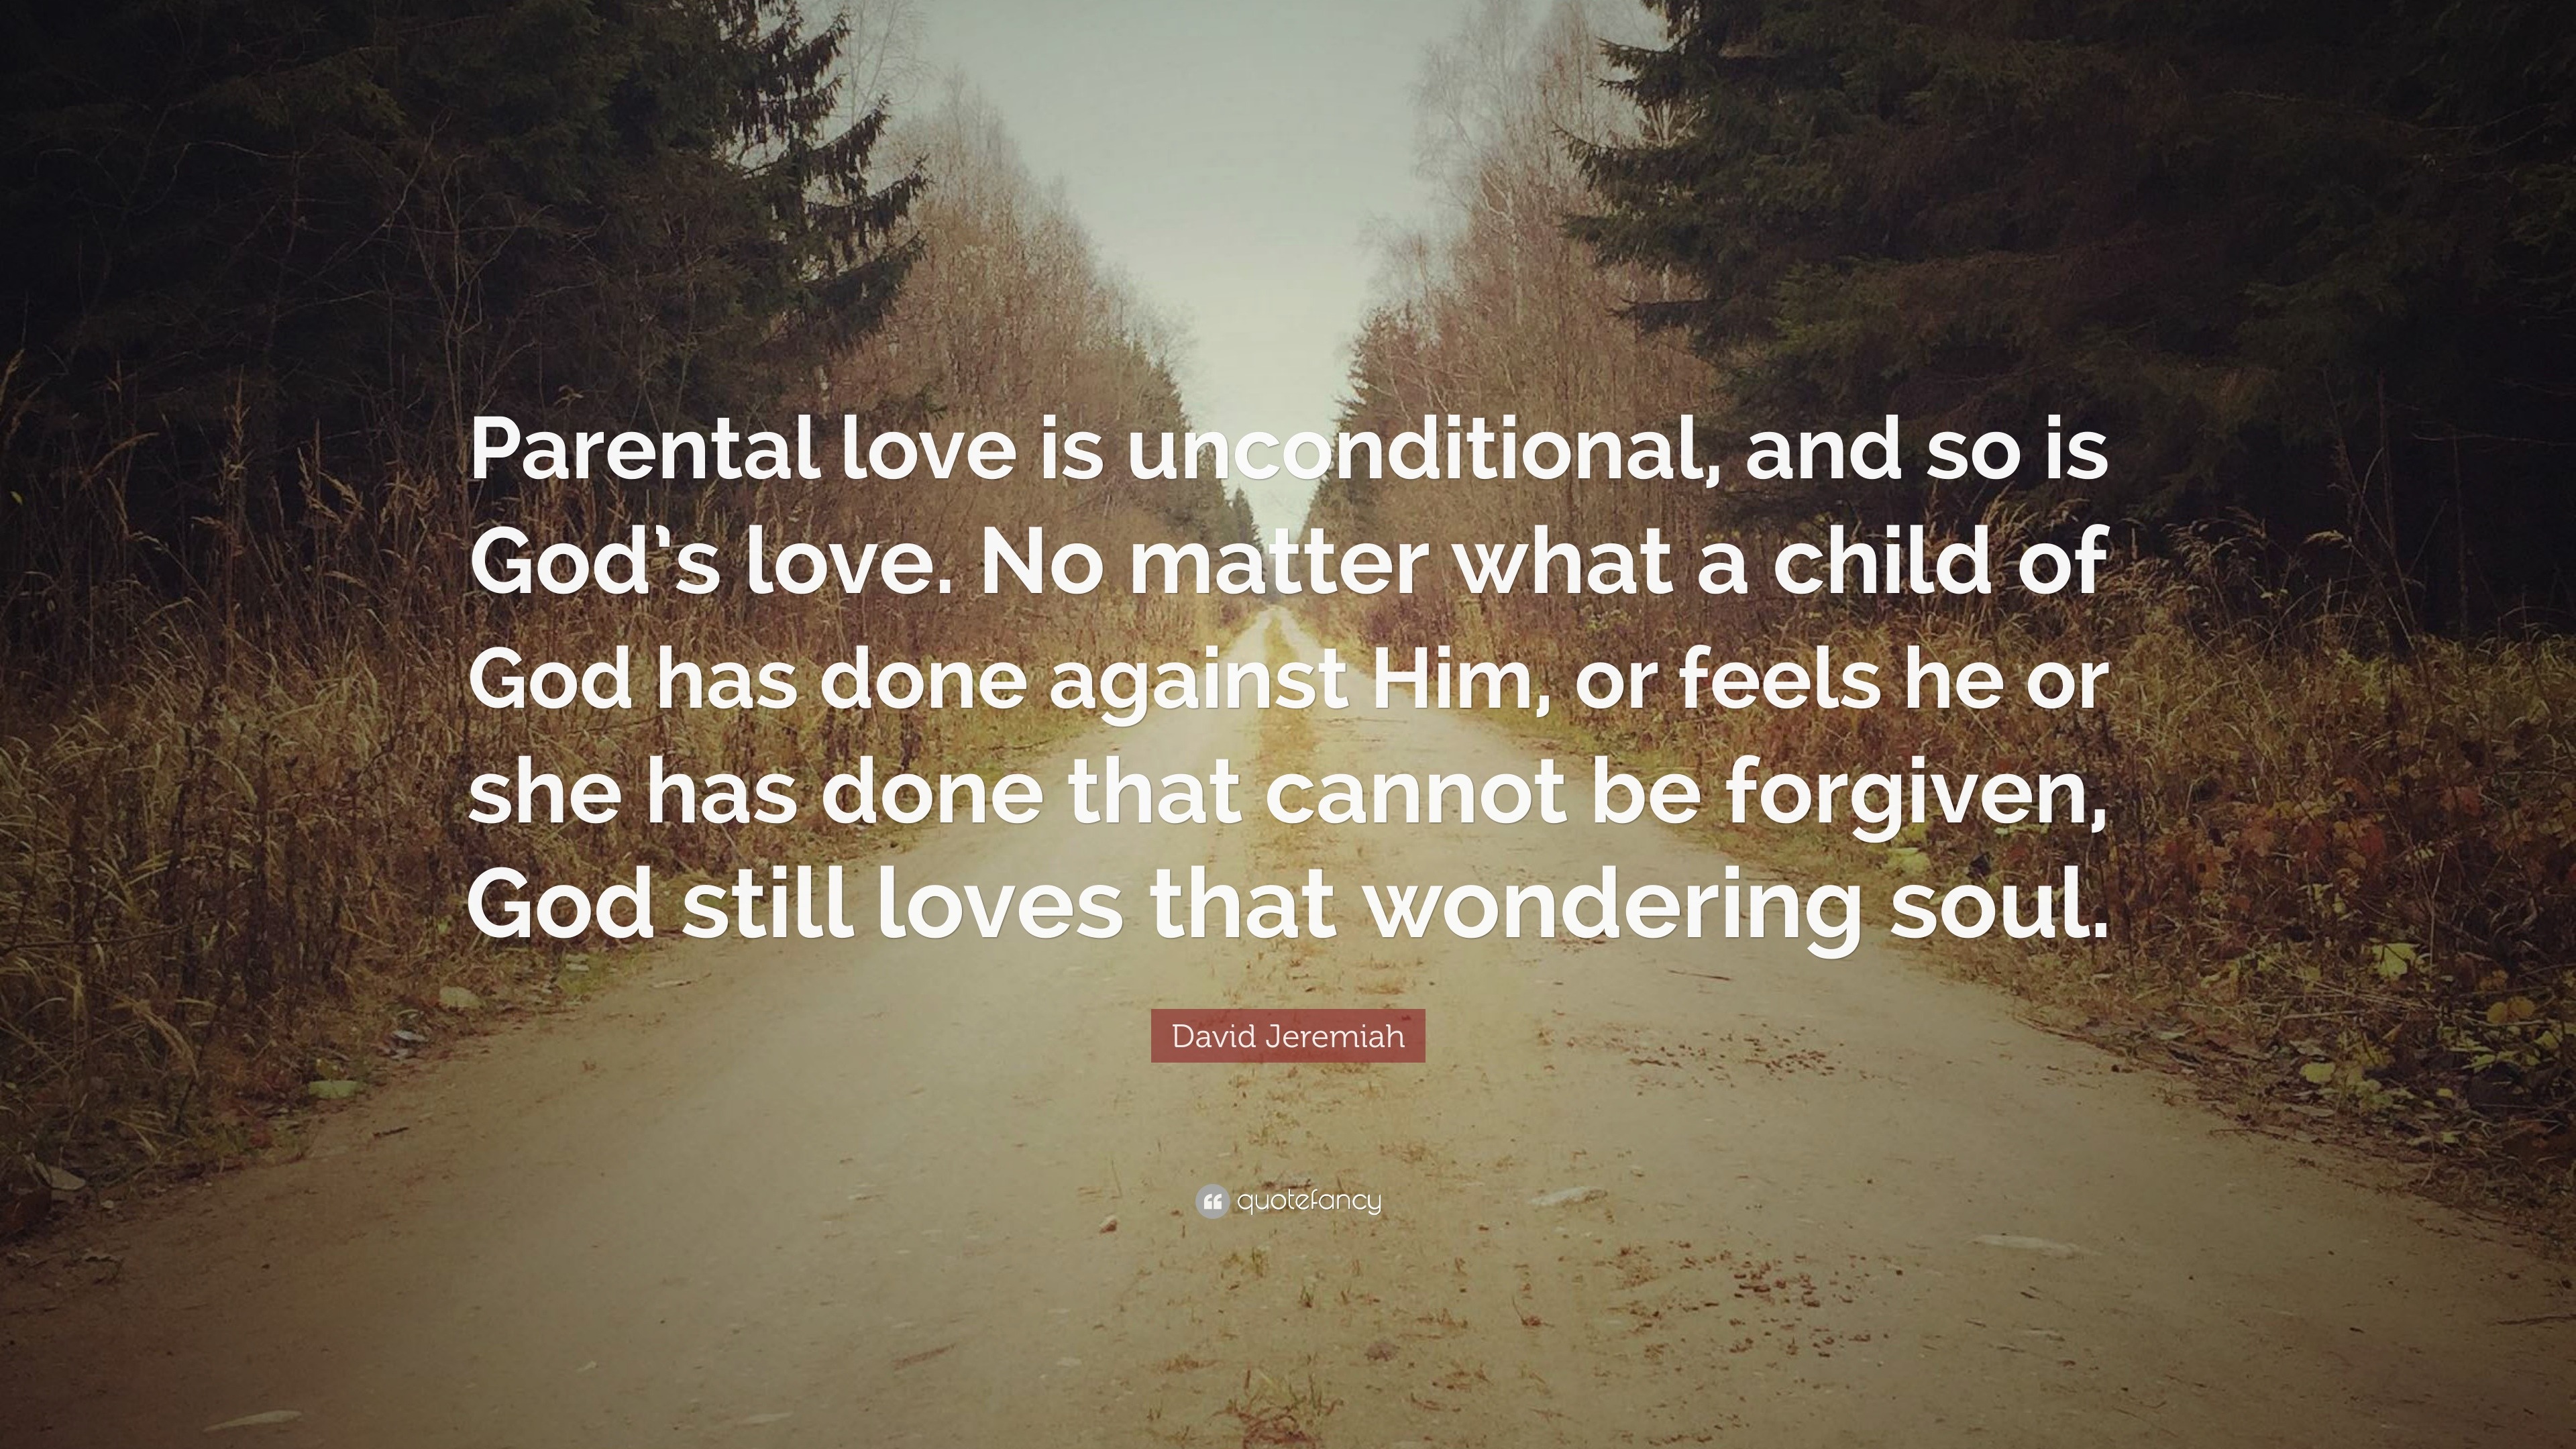 David Jeremiah Quote “Parental love is unconditional and so is God s love